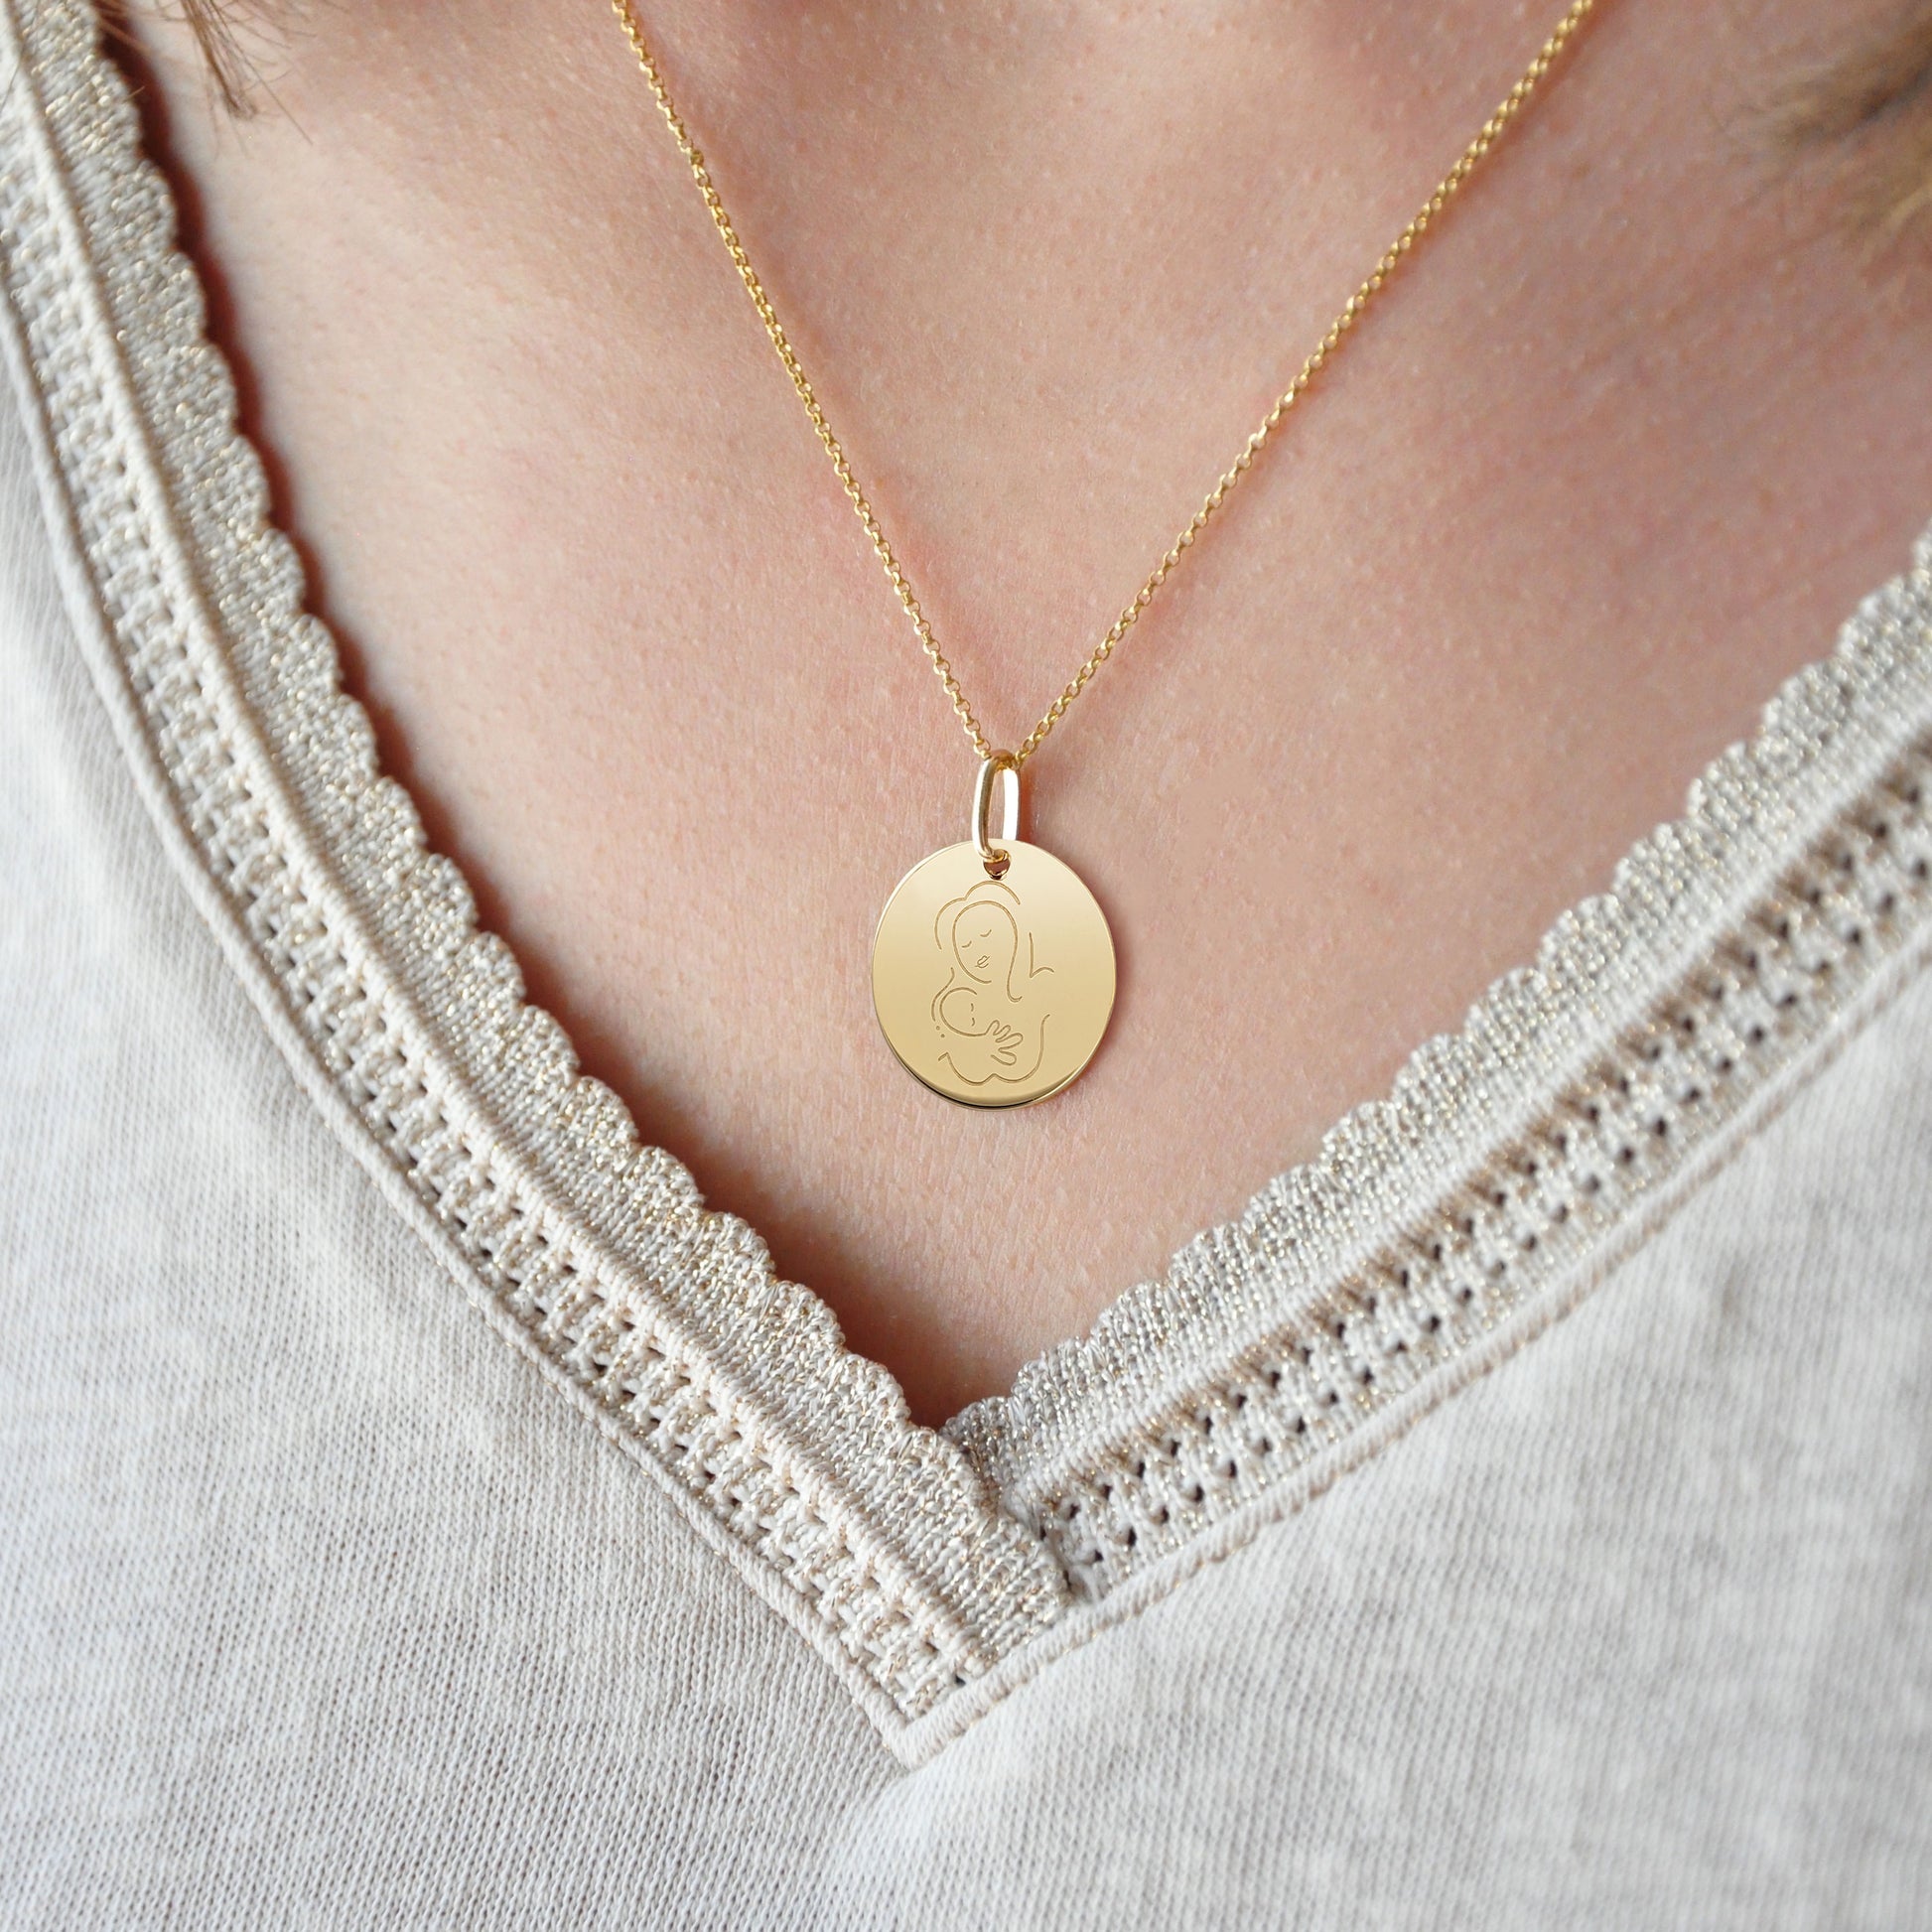 Muze 18k gold Vermeil Child Medal necklace, art inspired jewelry symbol of love, protection, tenderness and motherhood. A meaningful sentimental gift perfect for mother, newly born or godchild